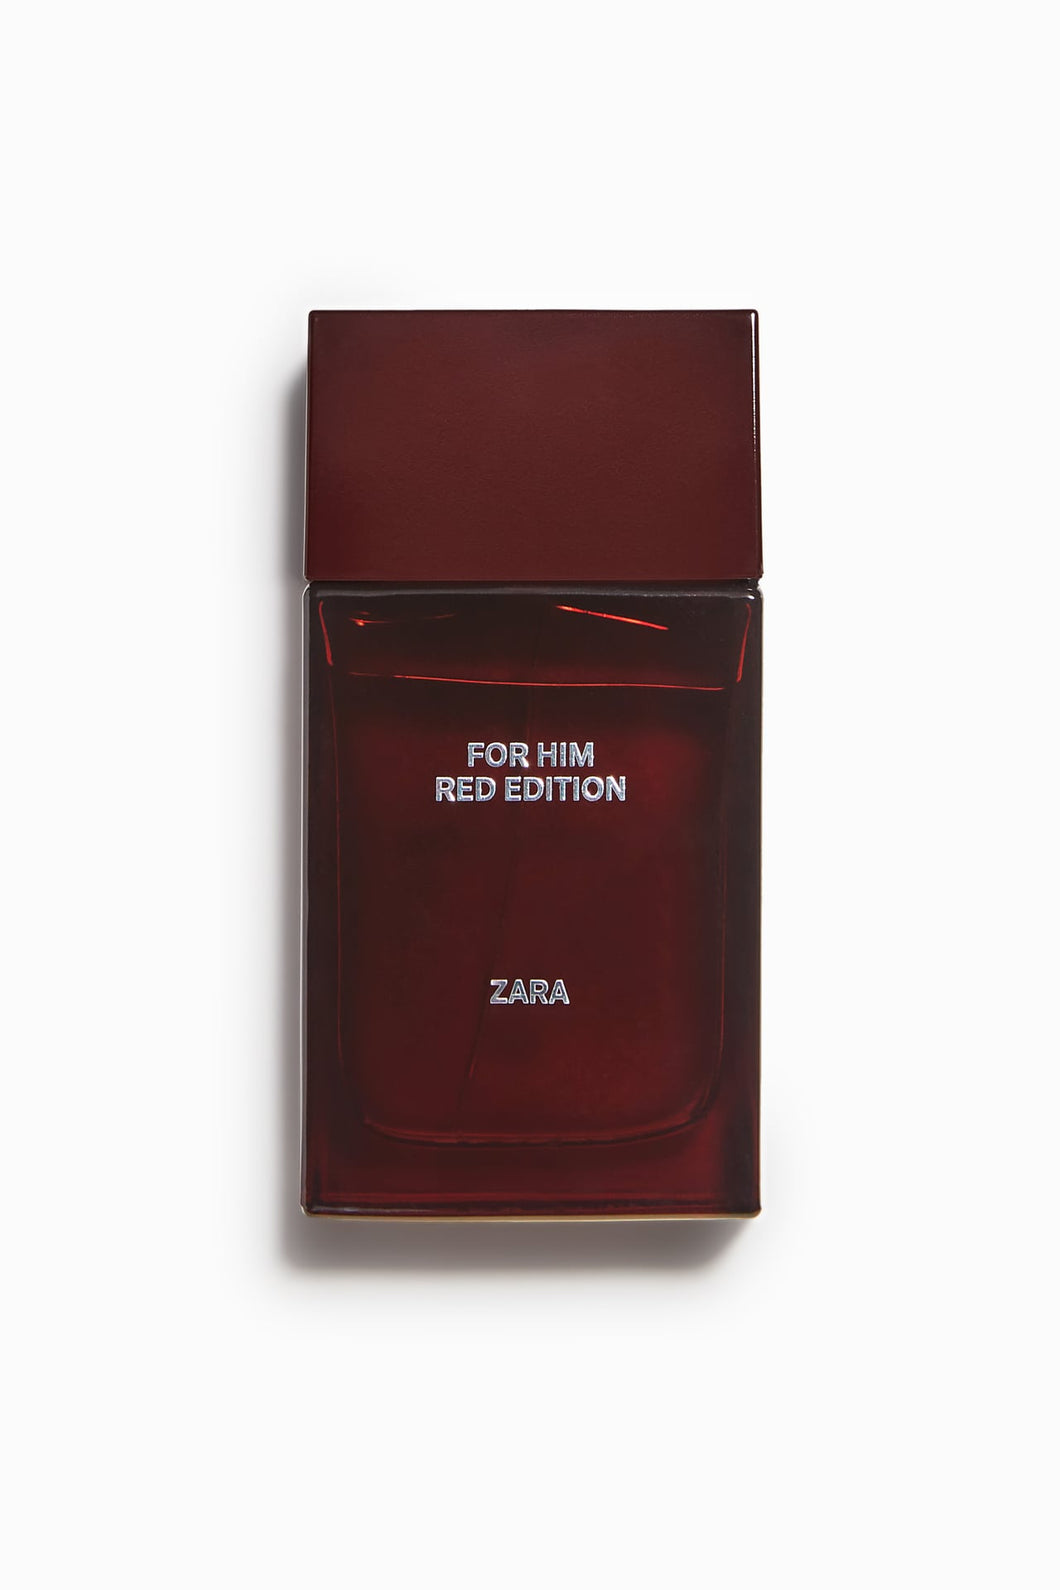 Zara For Him Red Edition 100mL